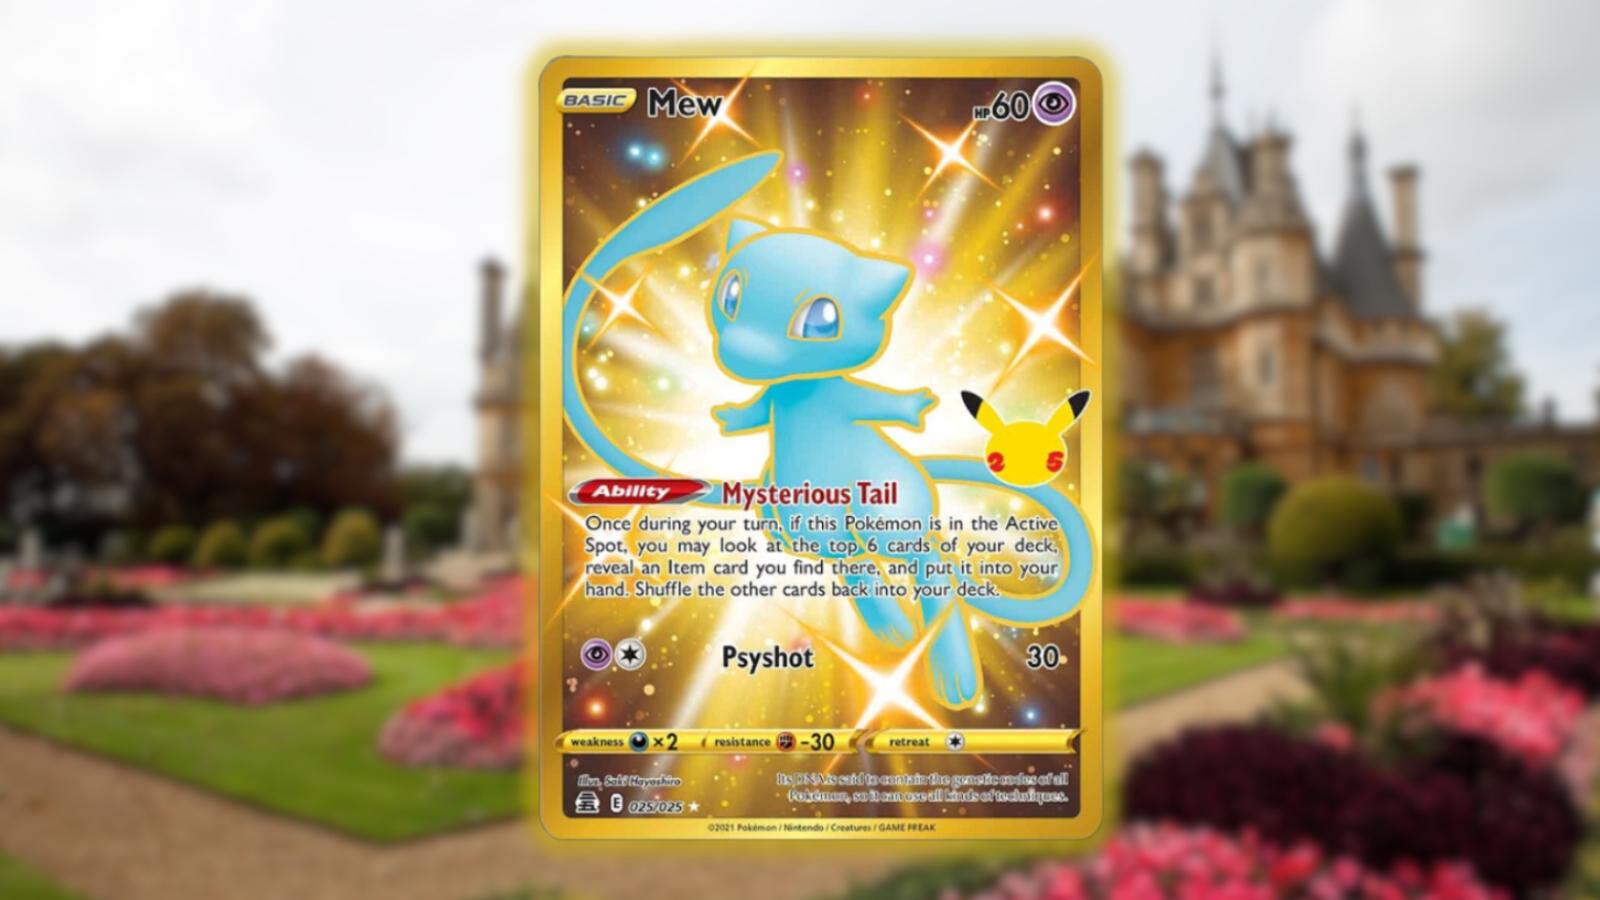 Golden Mew TCG card over a Manor House background